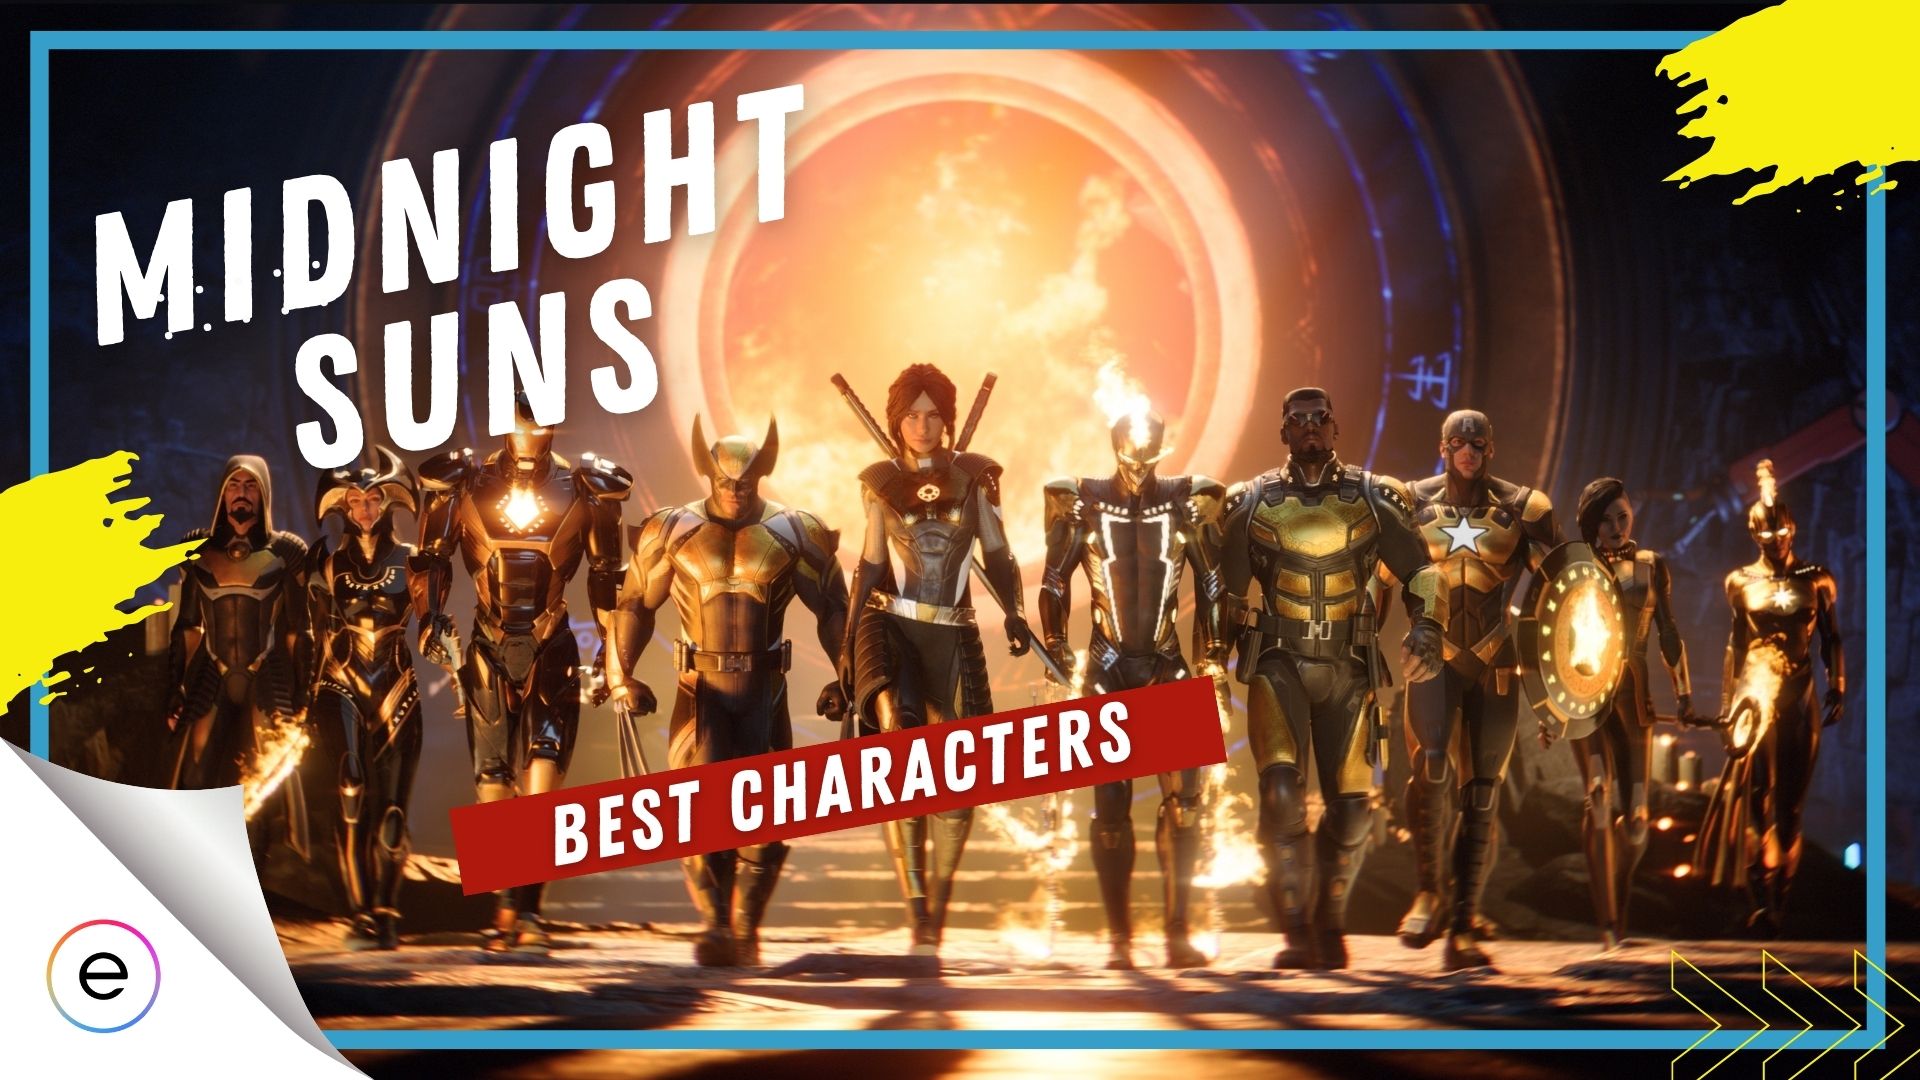 Best Characters in Midnight Suns.